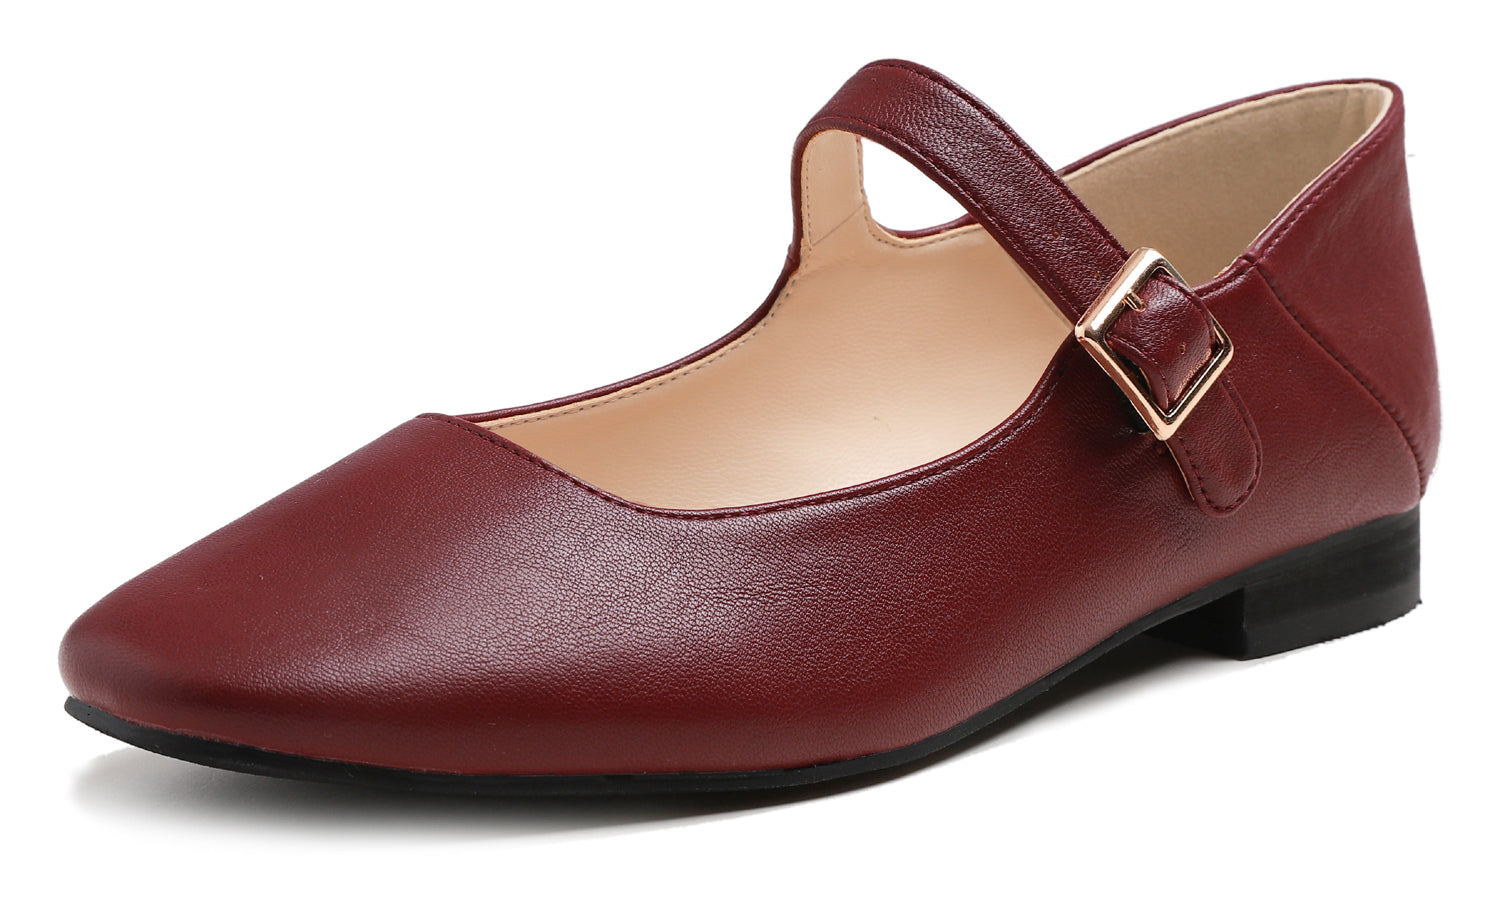 Feversole Women's Mary Jane Fashion Square Toe Easy Buckle Low Heel Slip On Flats Burgundy Red Vegan Leather